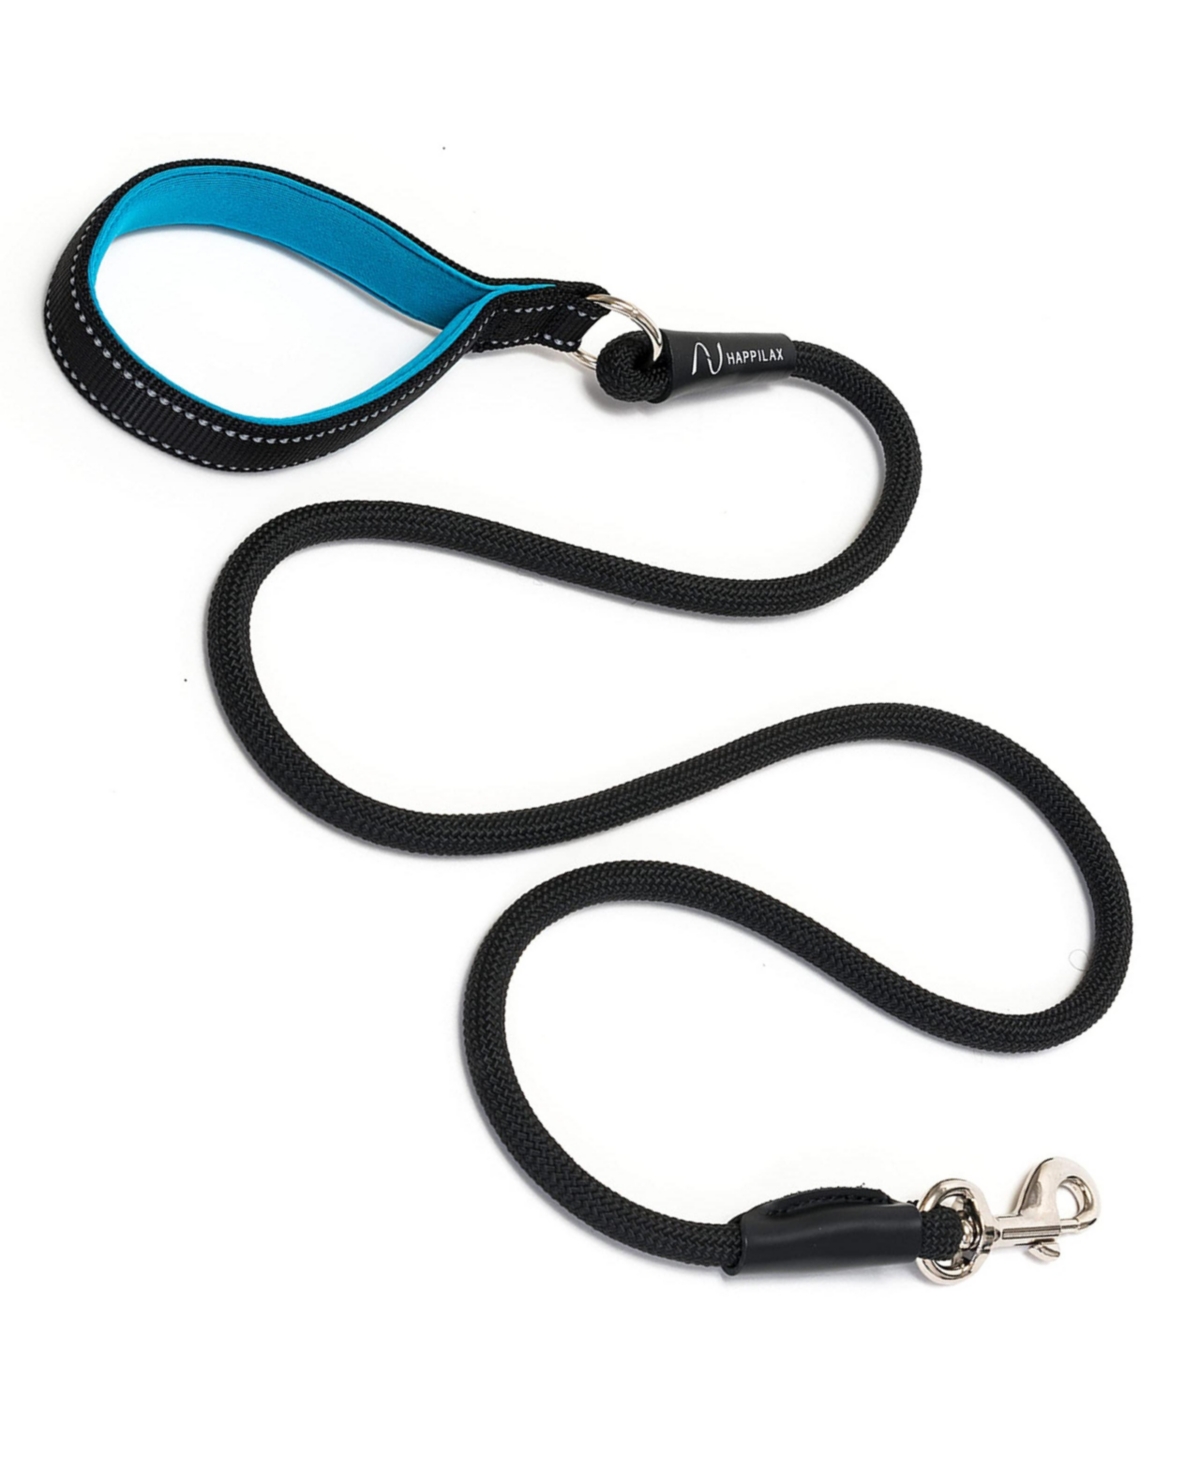 Robust Rope Dog Leash with Padded Handle and Reflective Hand Loop - Black